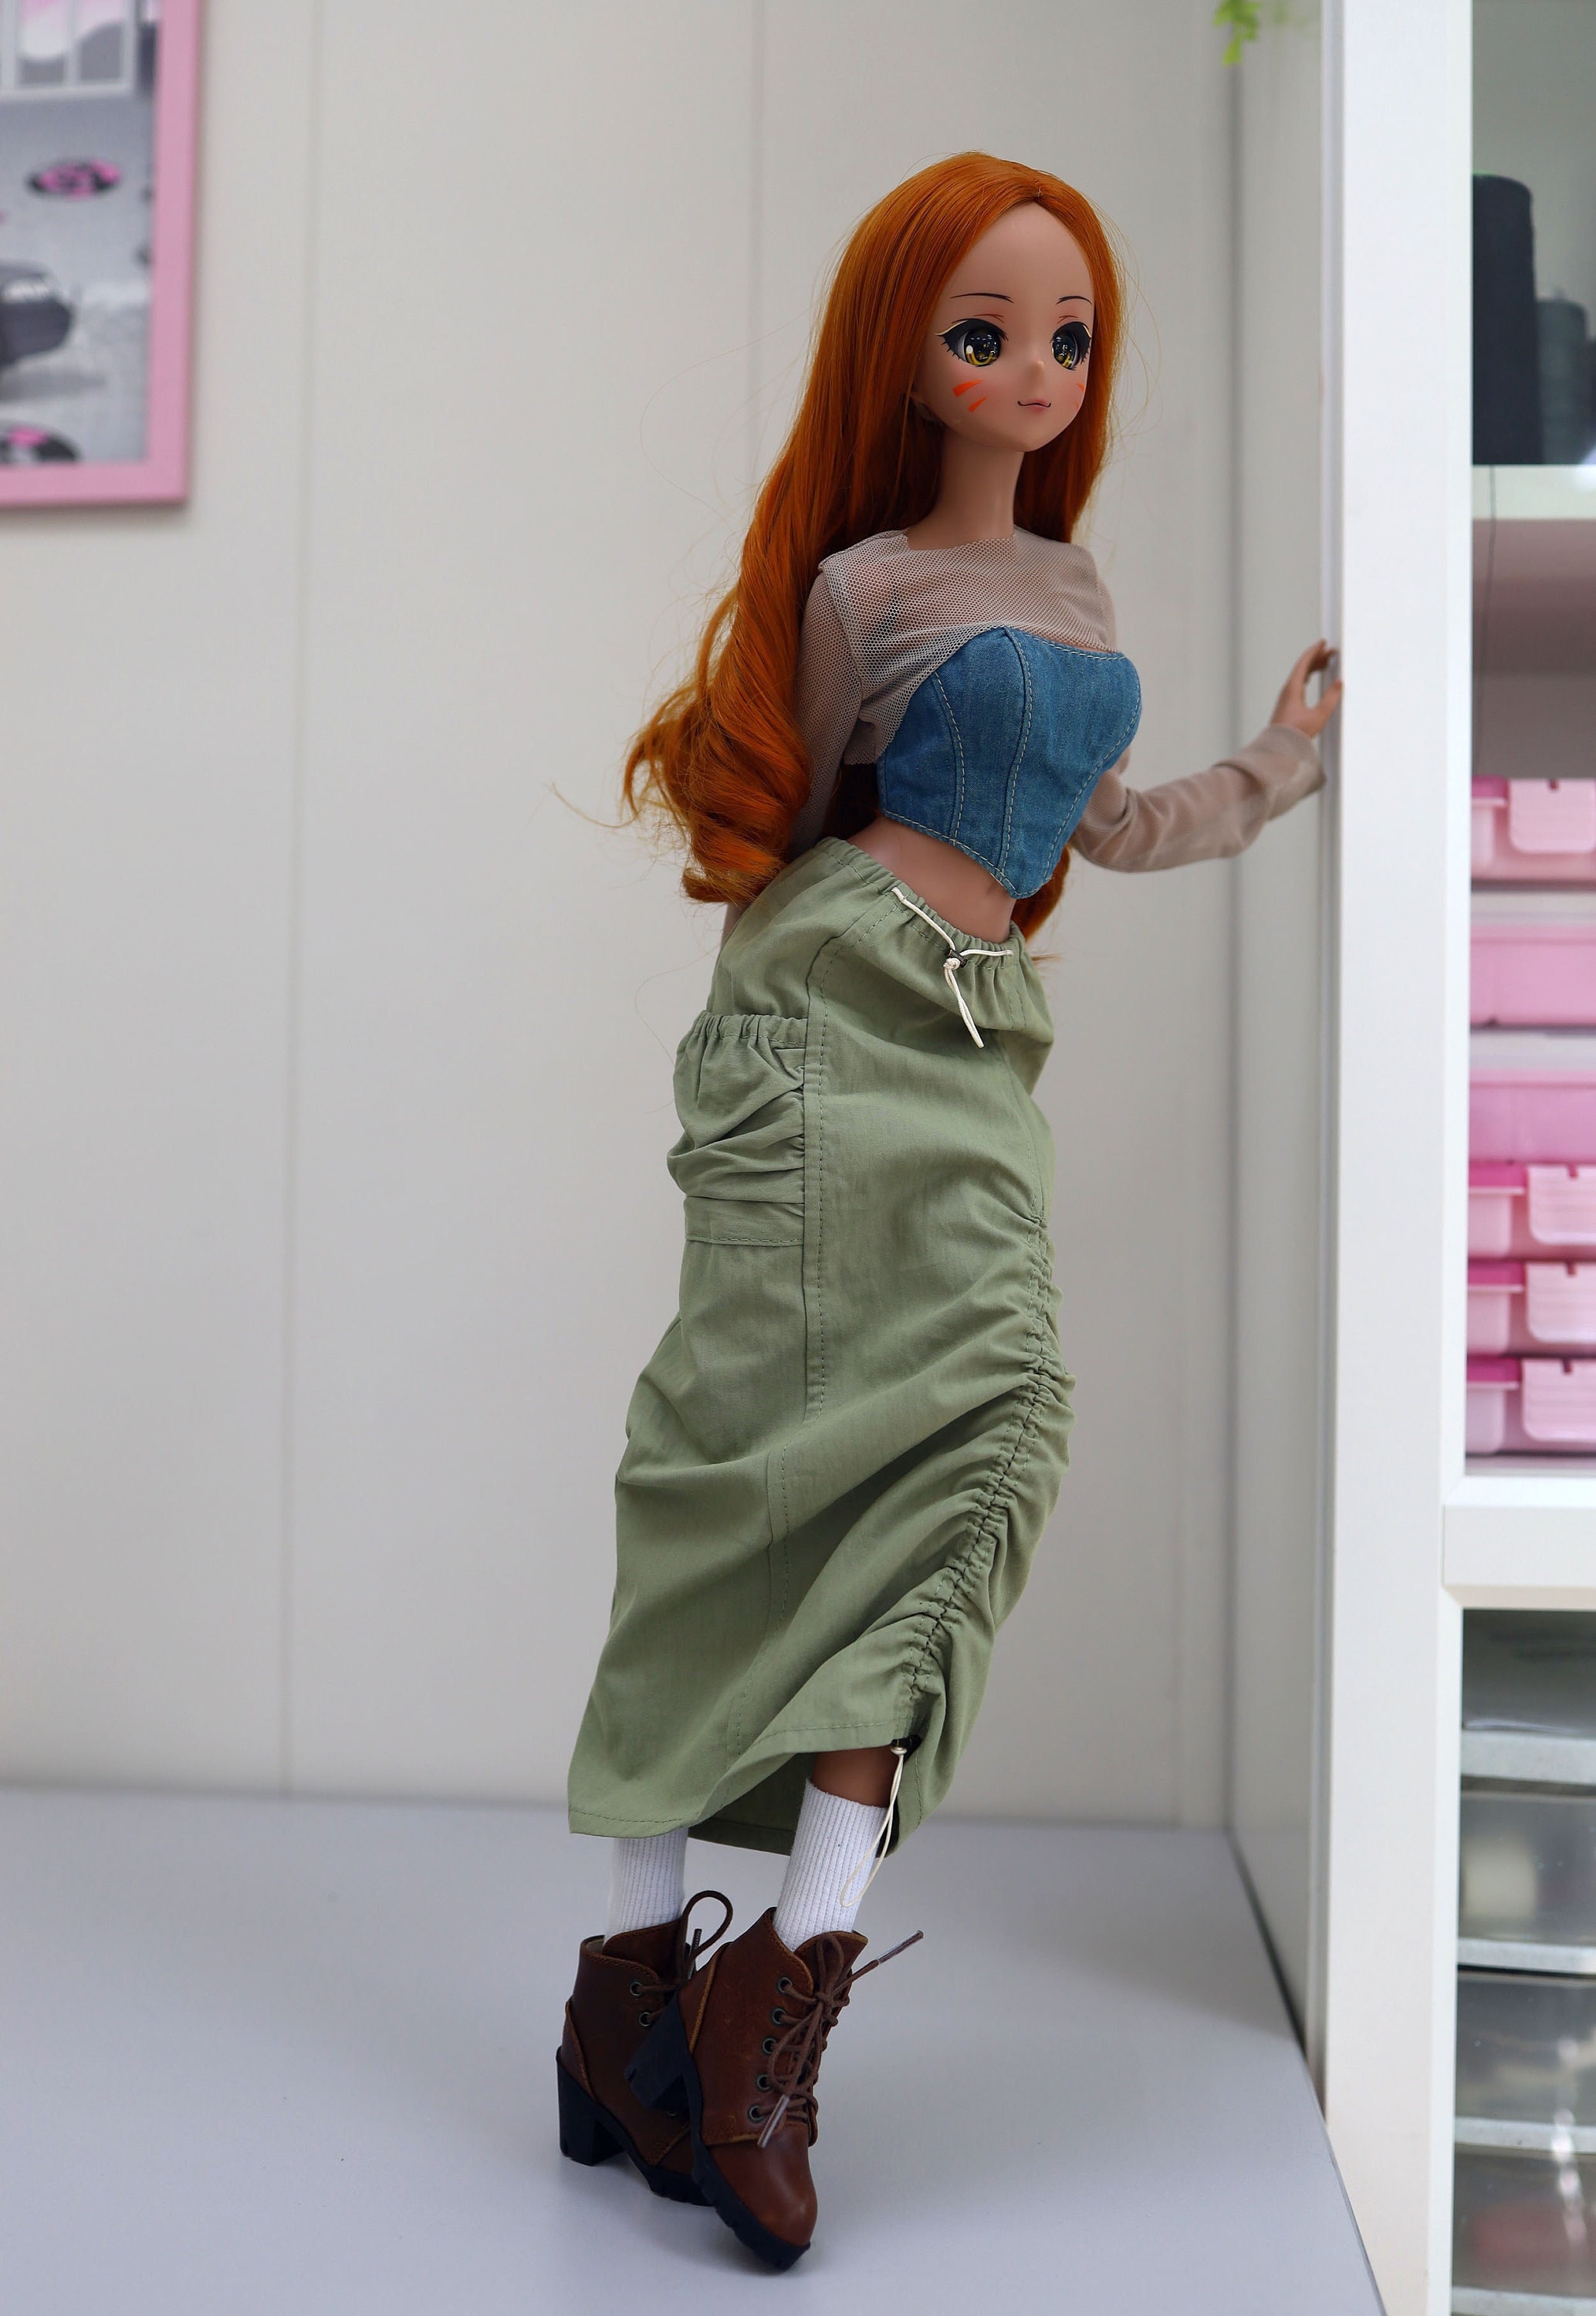 Smart Doll Leg Warmers. Lacy and Soft. 